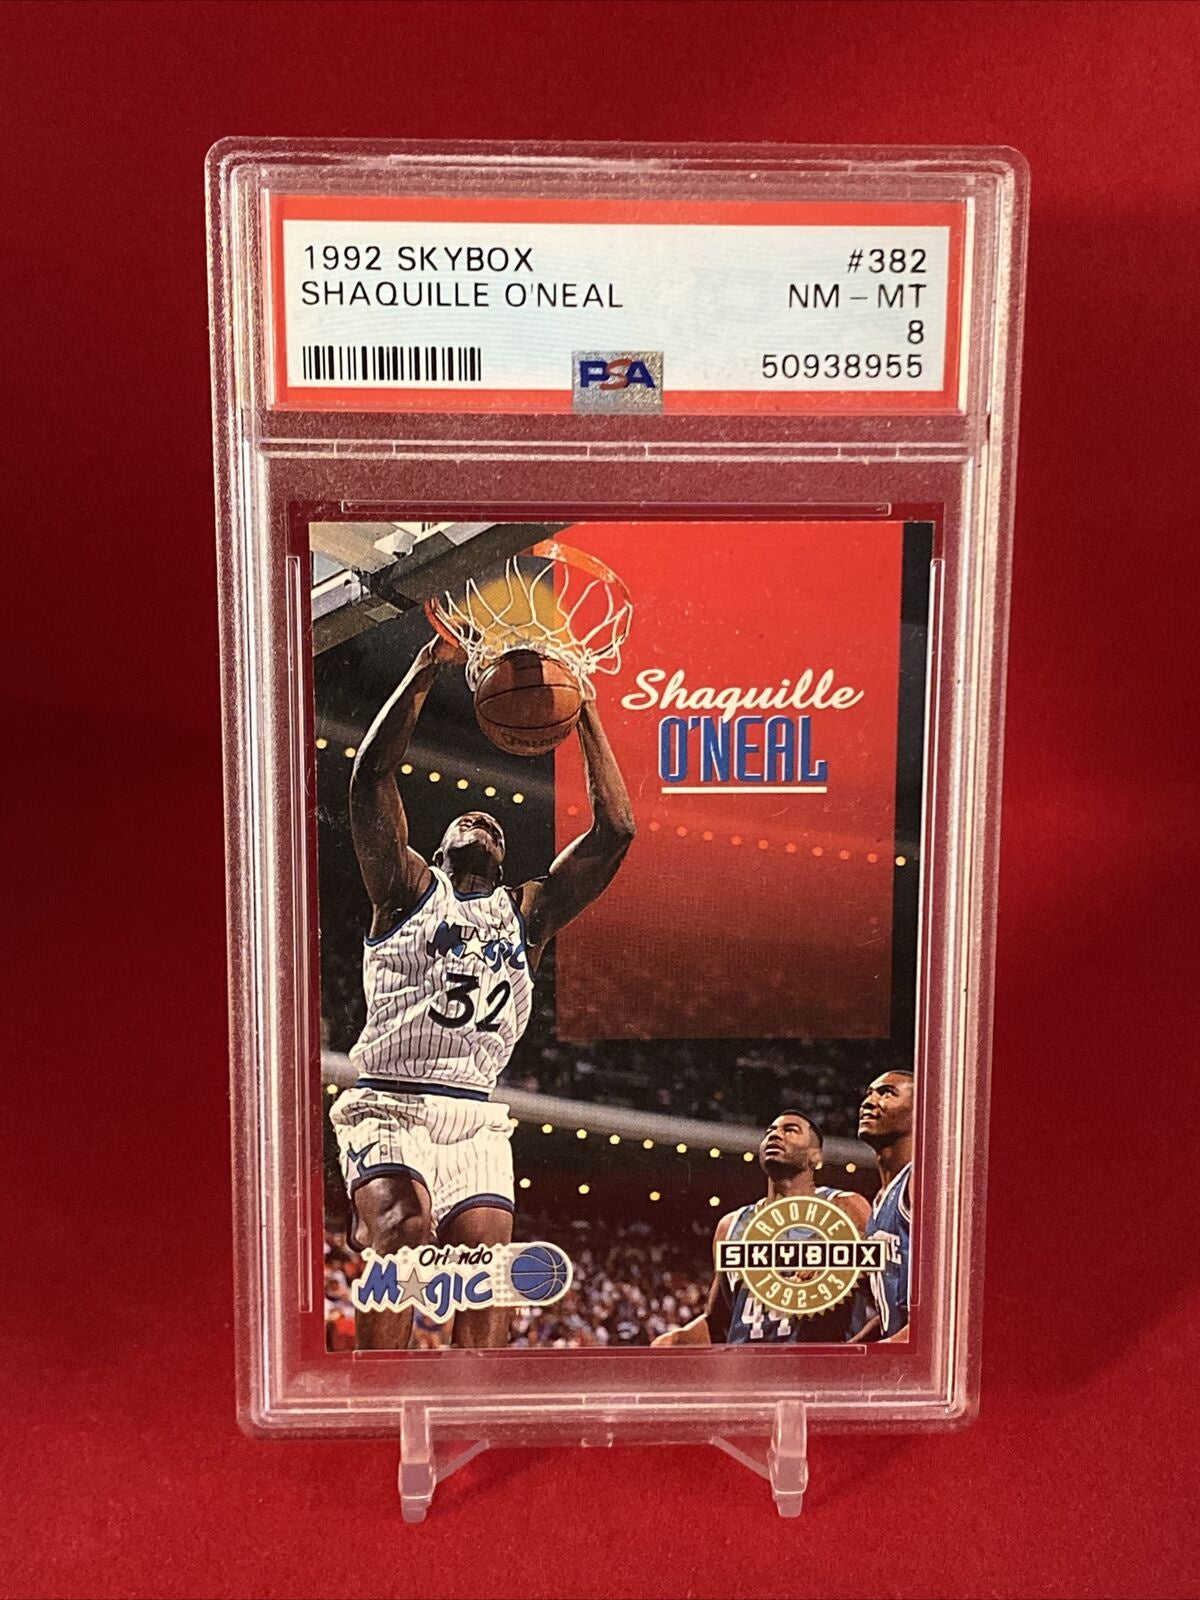 1992 Skybox Shaquille O'Neal #382 PSA Graded 8 Orlando Magic RC (Rookie Card)